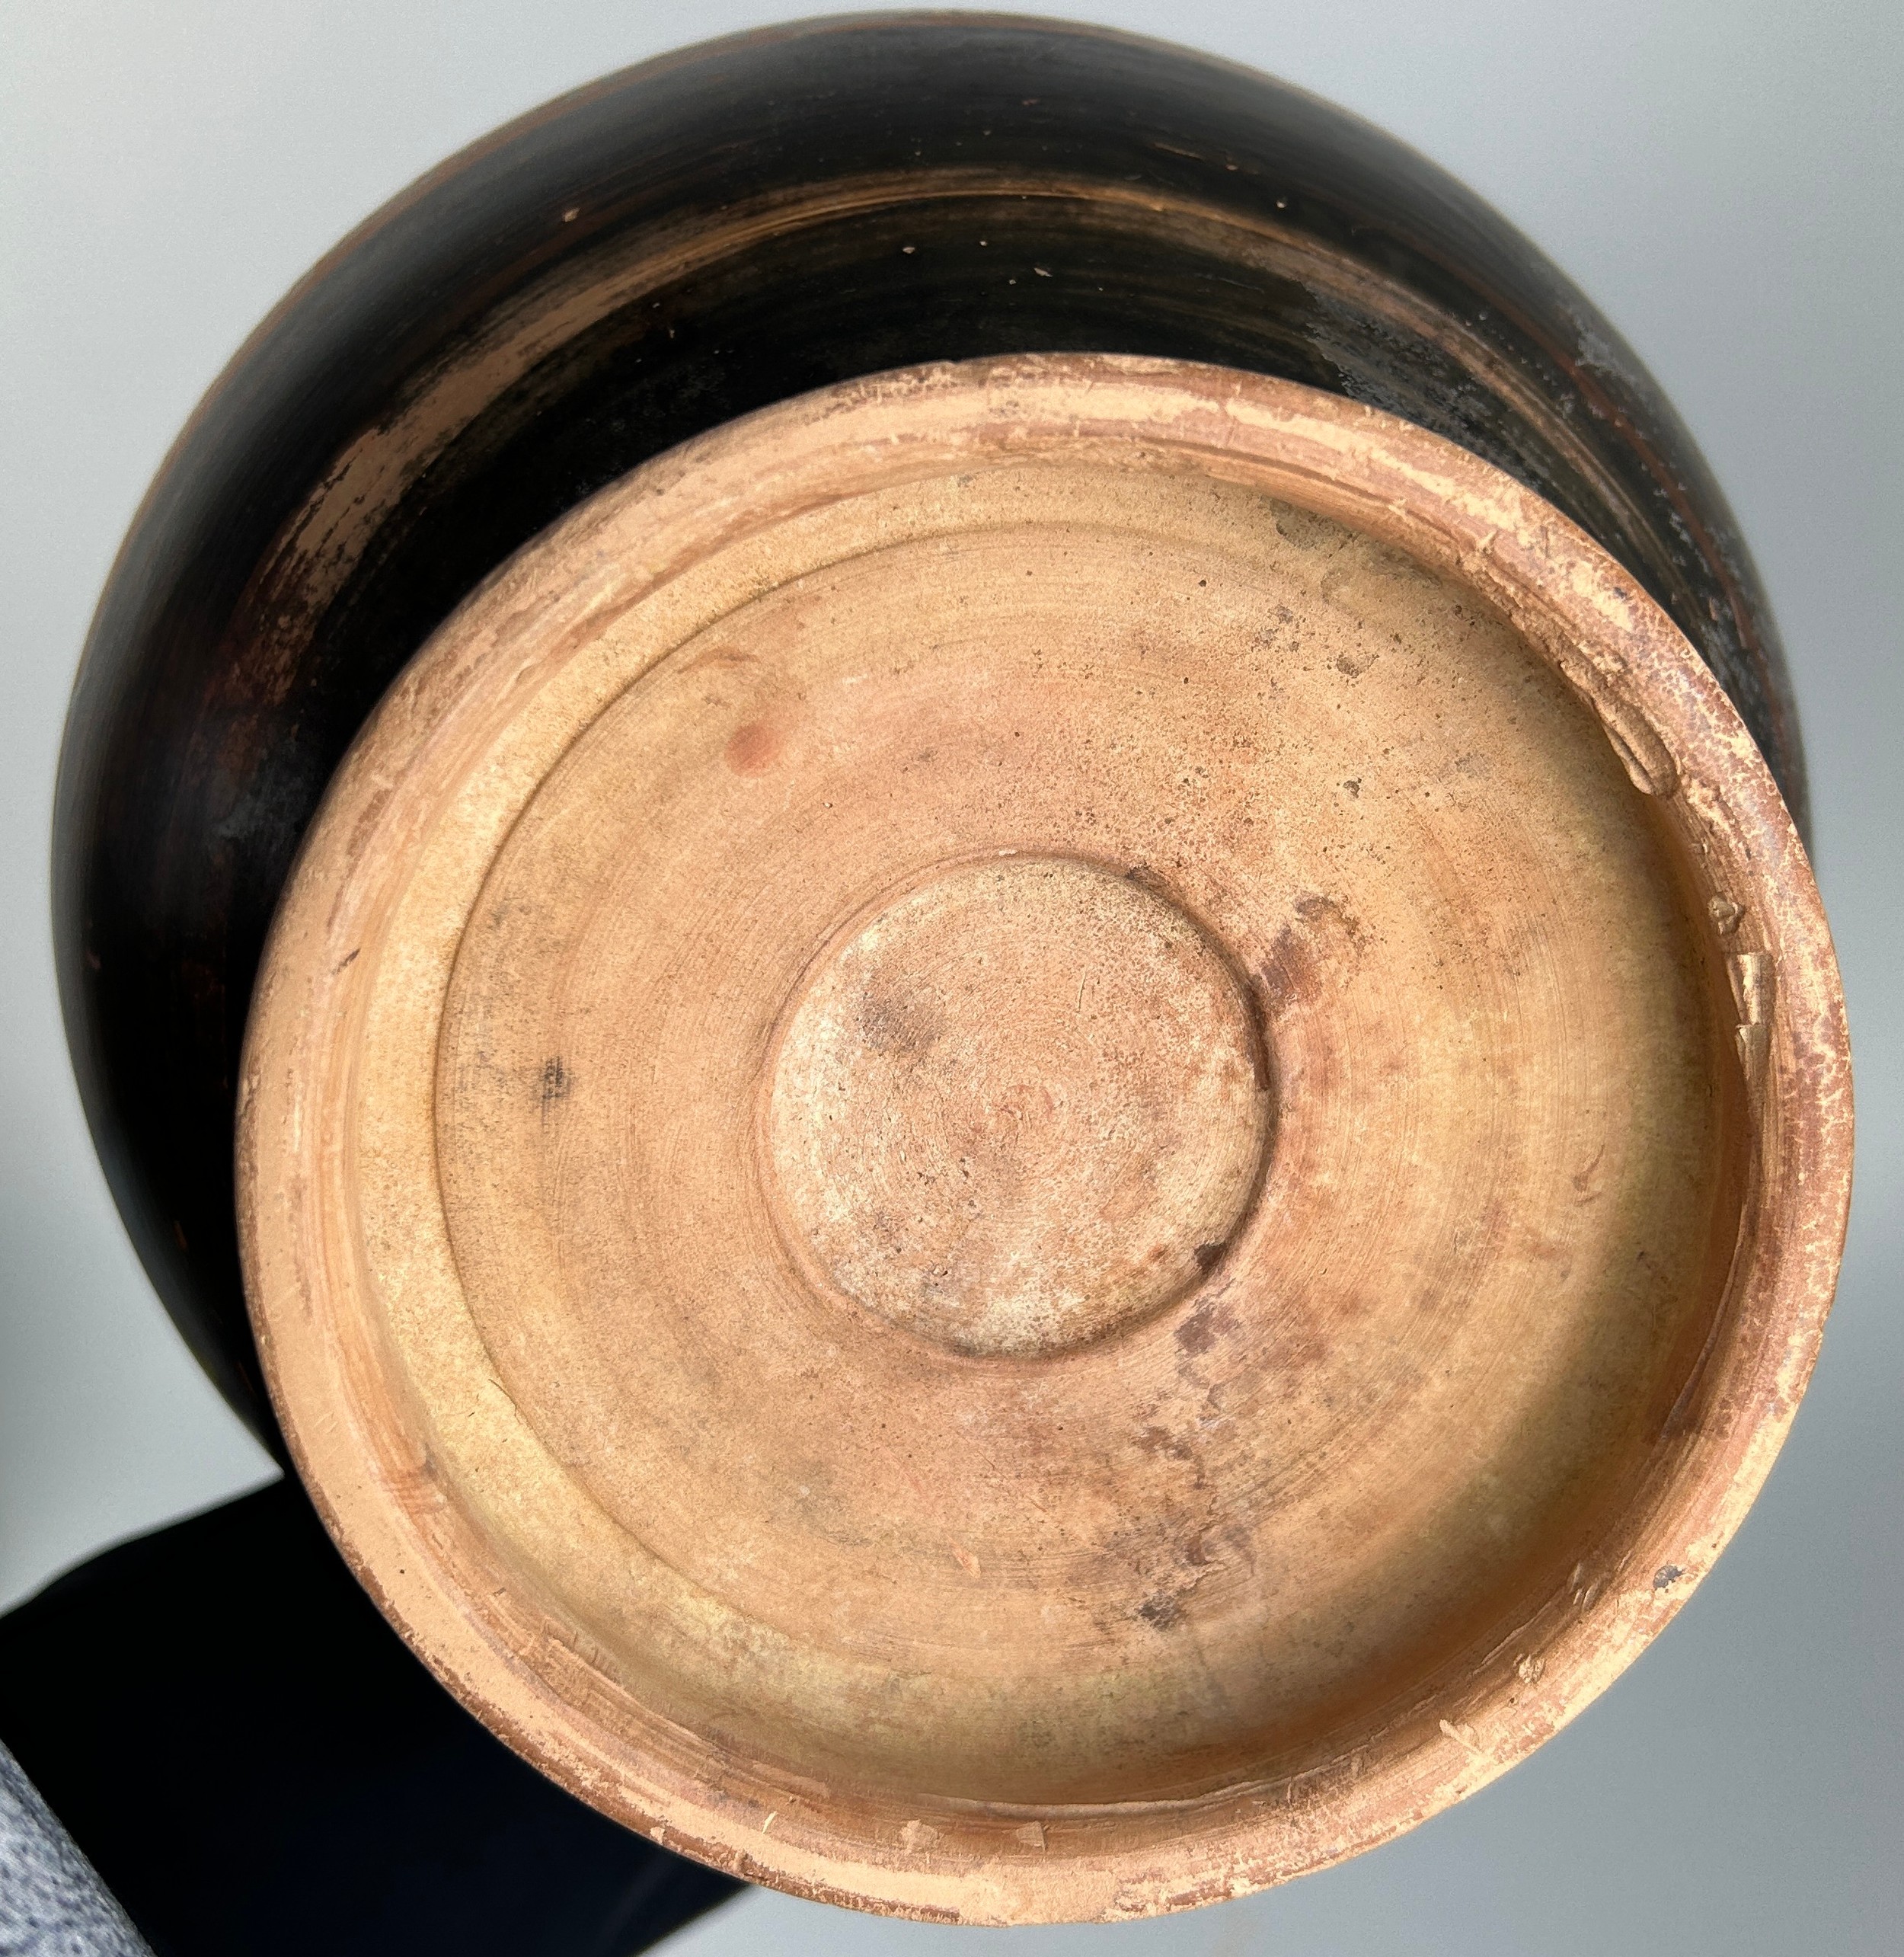 AN APULIAN POTTERY PELIKE CIRCA 4TH CENTURY B.C. 39cm x 21cm One side depicts a young man and - Image 7 of 7